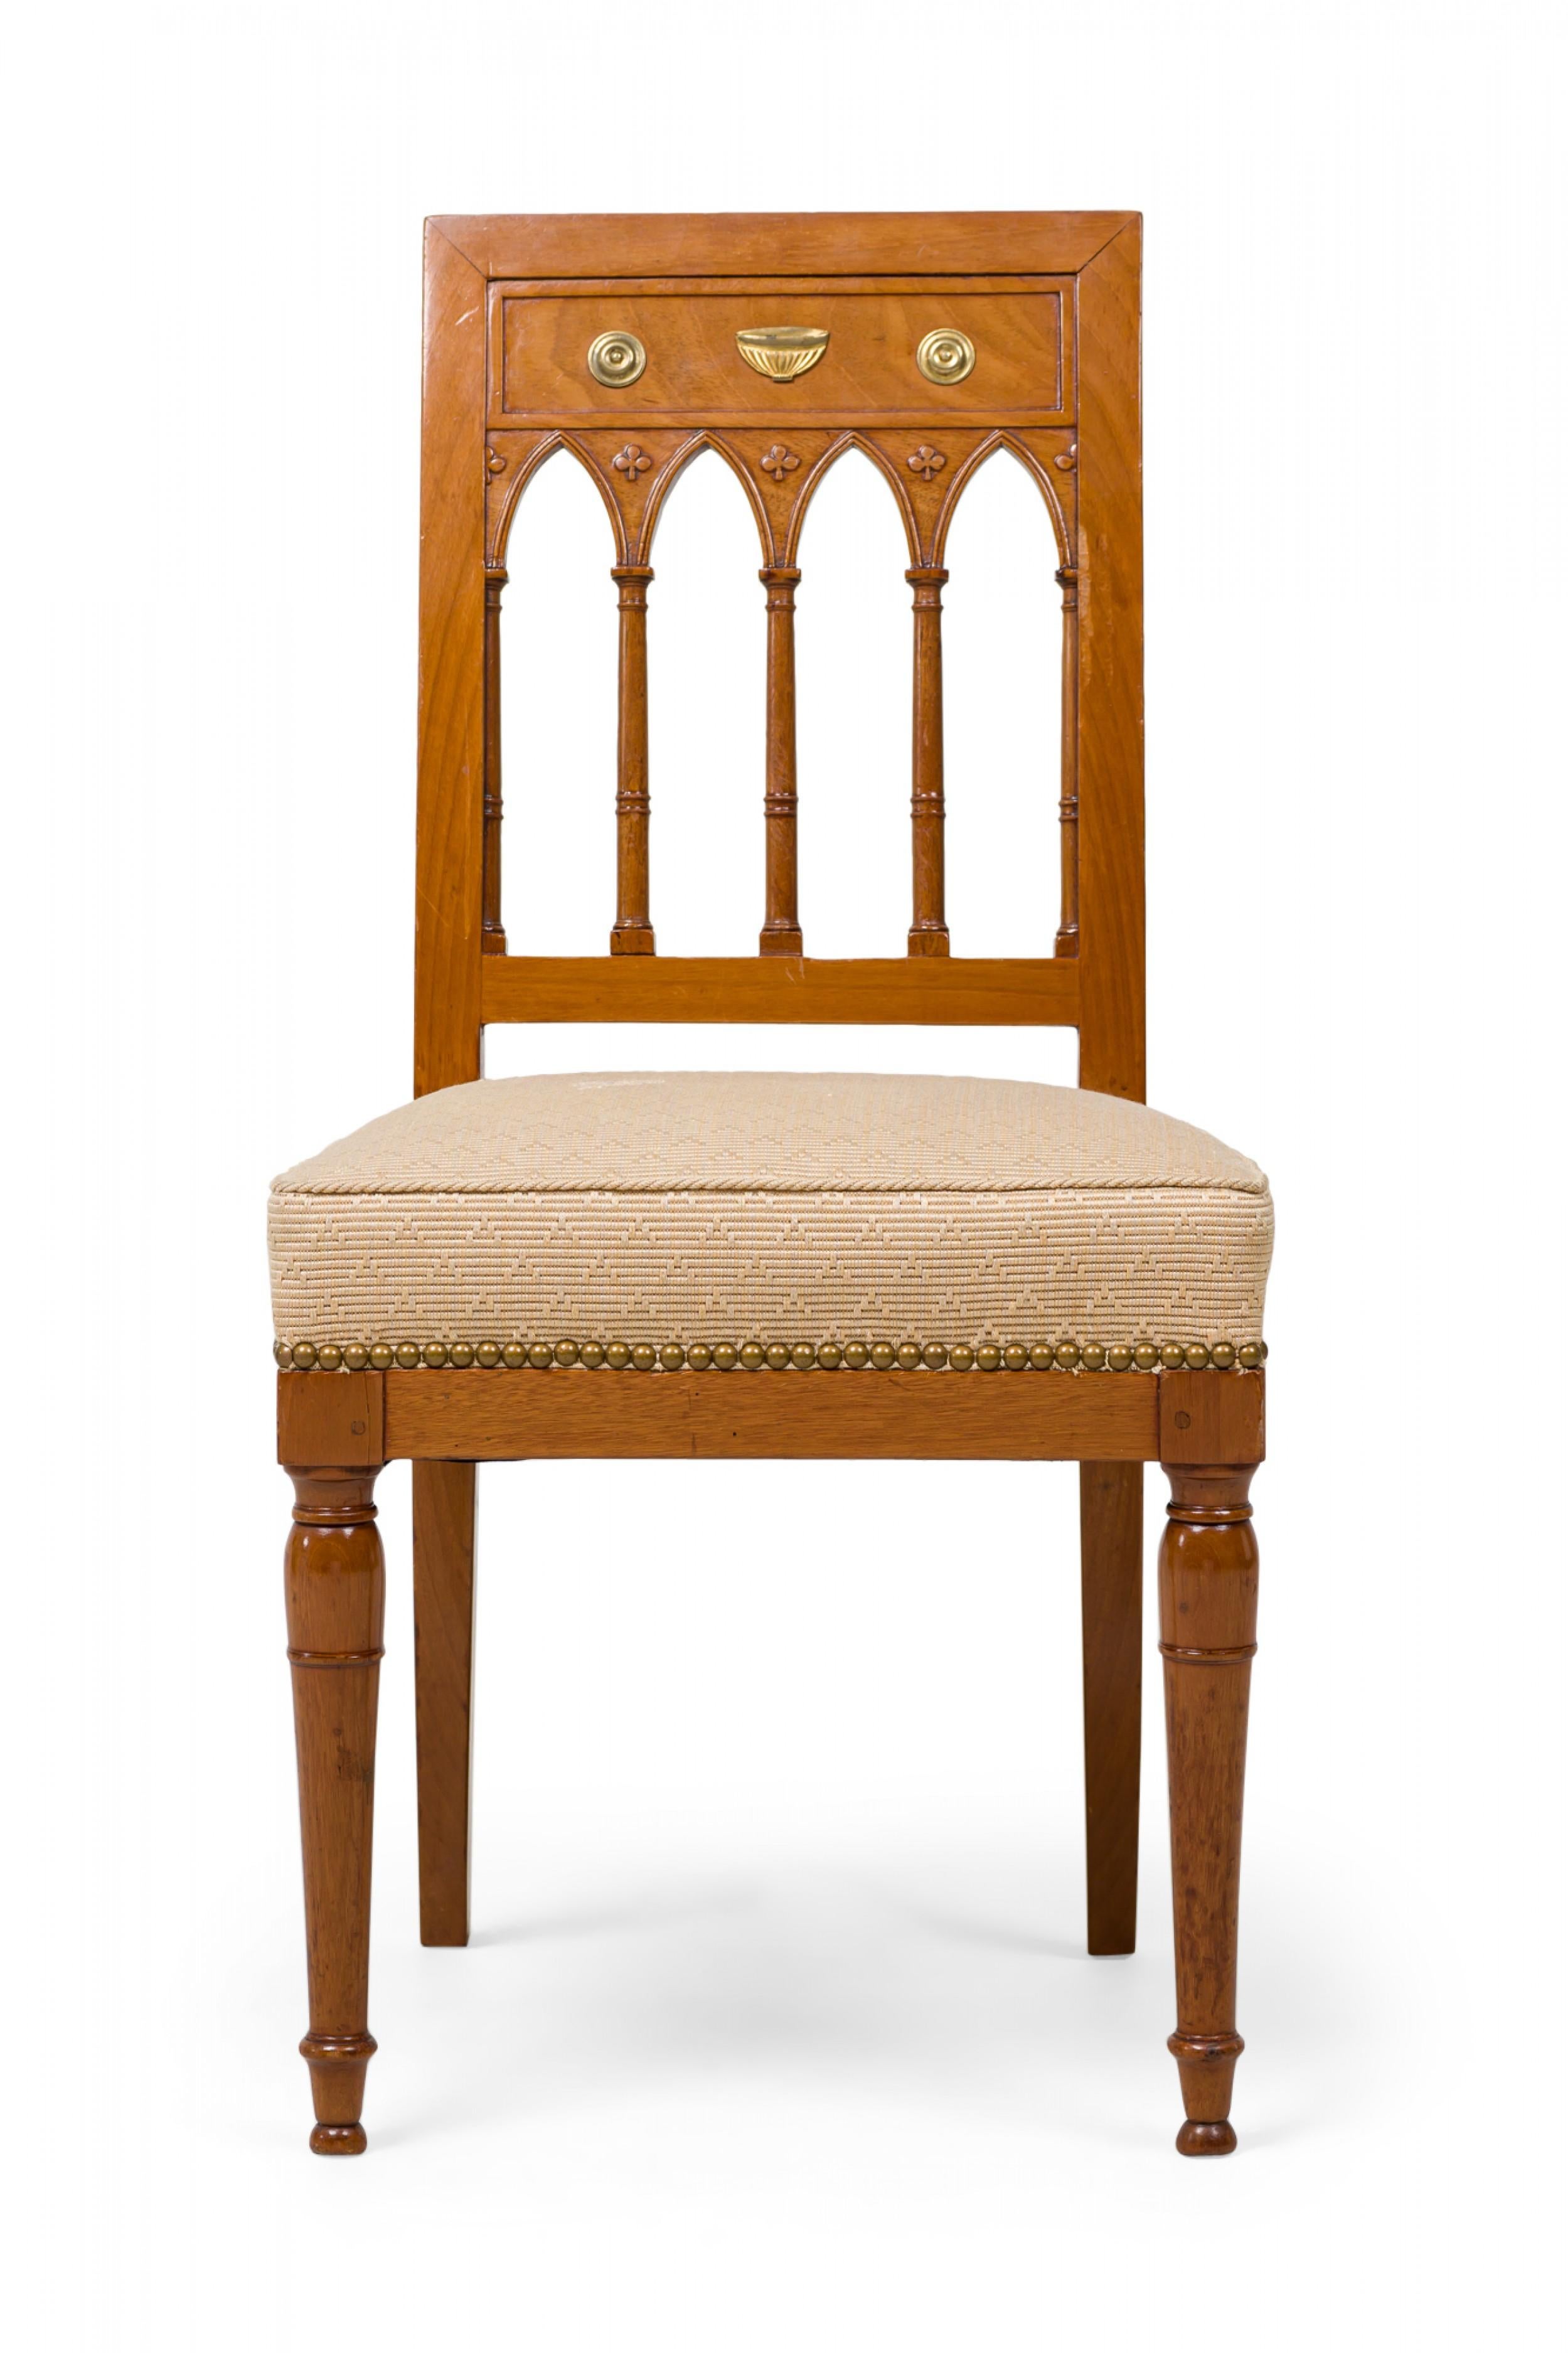 SET of 4 French Charles X dining / side chairs with slightly sloped rectangular openwork backs in a carved arch design featuring an applied brass urn flanked by 2 medallions, upholstered seat in a textured beige fabric, bordered by a row of brass